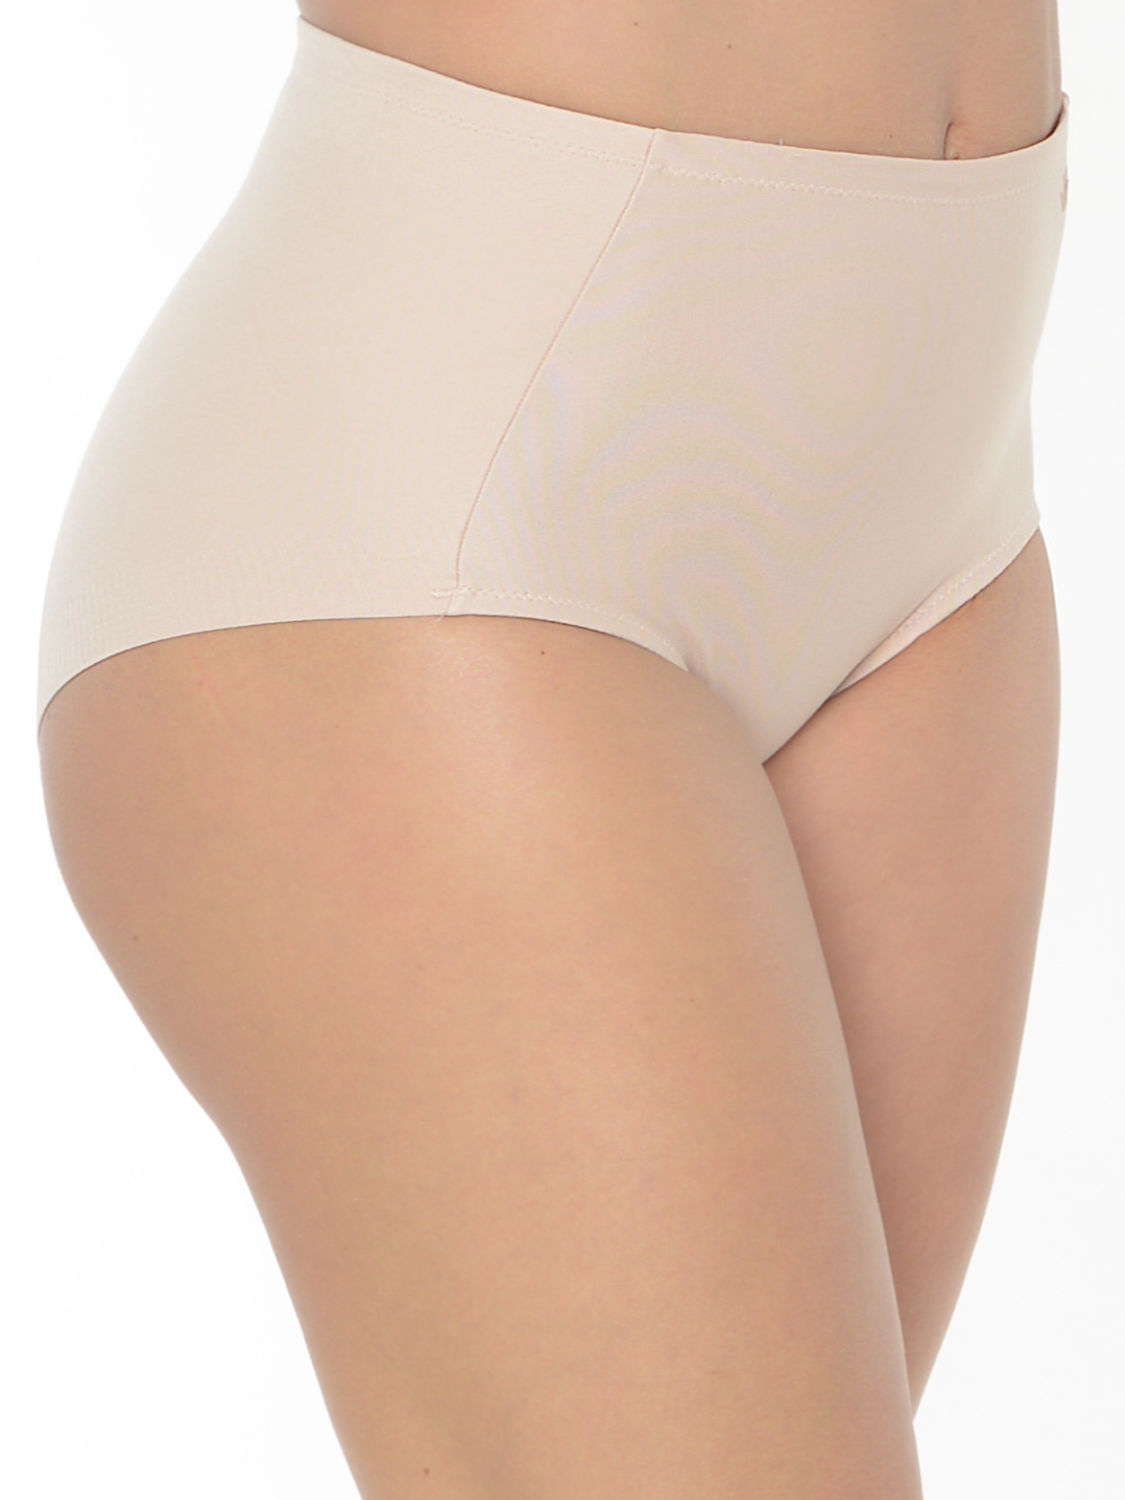 Triumph Panty Becca Extra High Cotton Farbe Neutral Beige